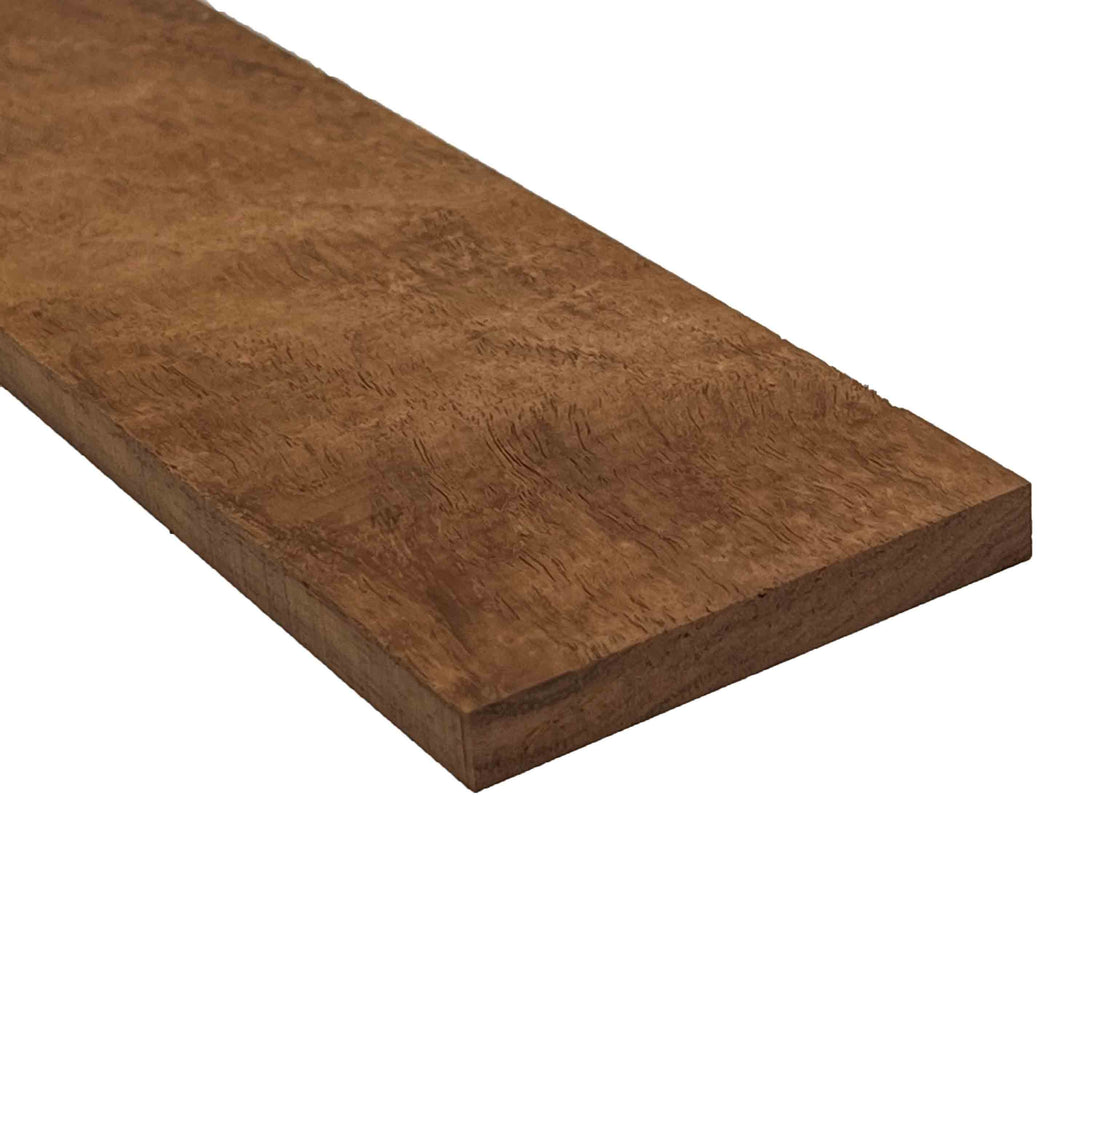 Caribbean Walnut Thin Stock Lumber Boards Wood Crafts - Exotic Wood Zone - Buy online Across USA 